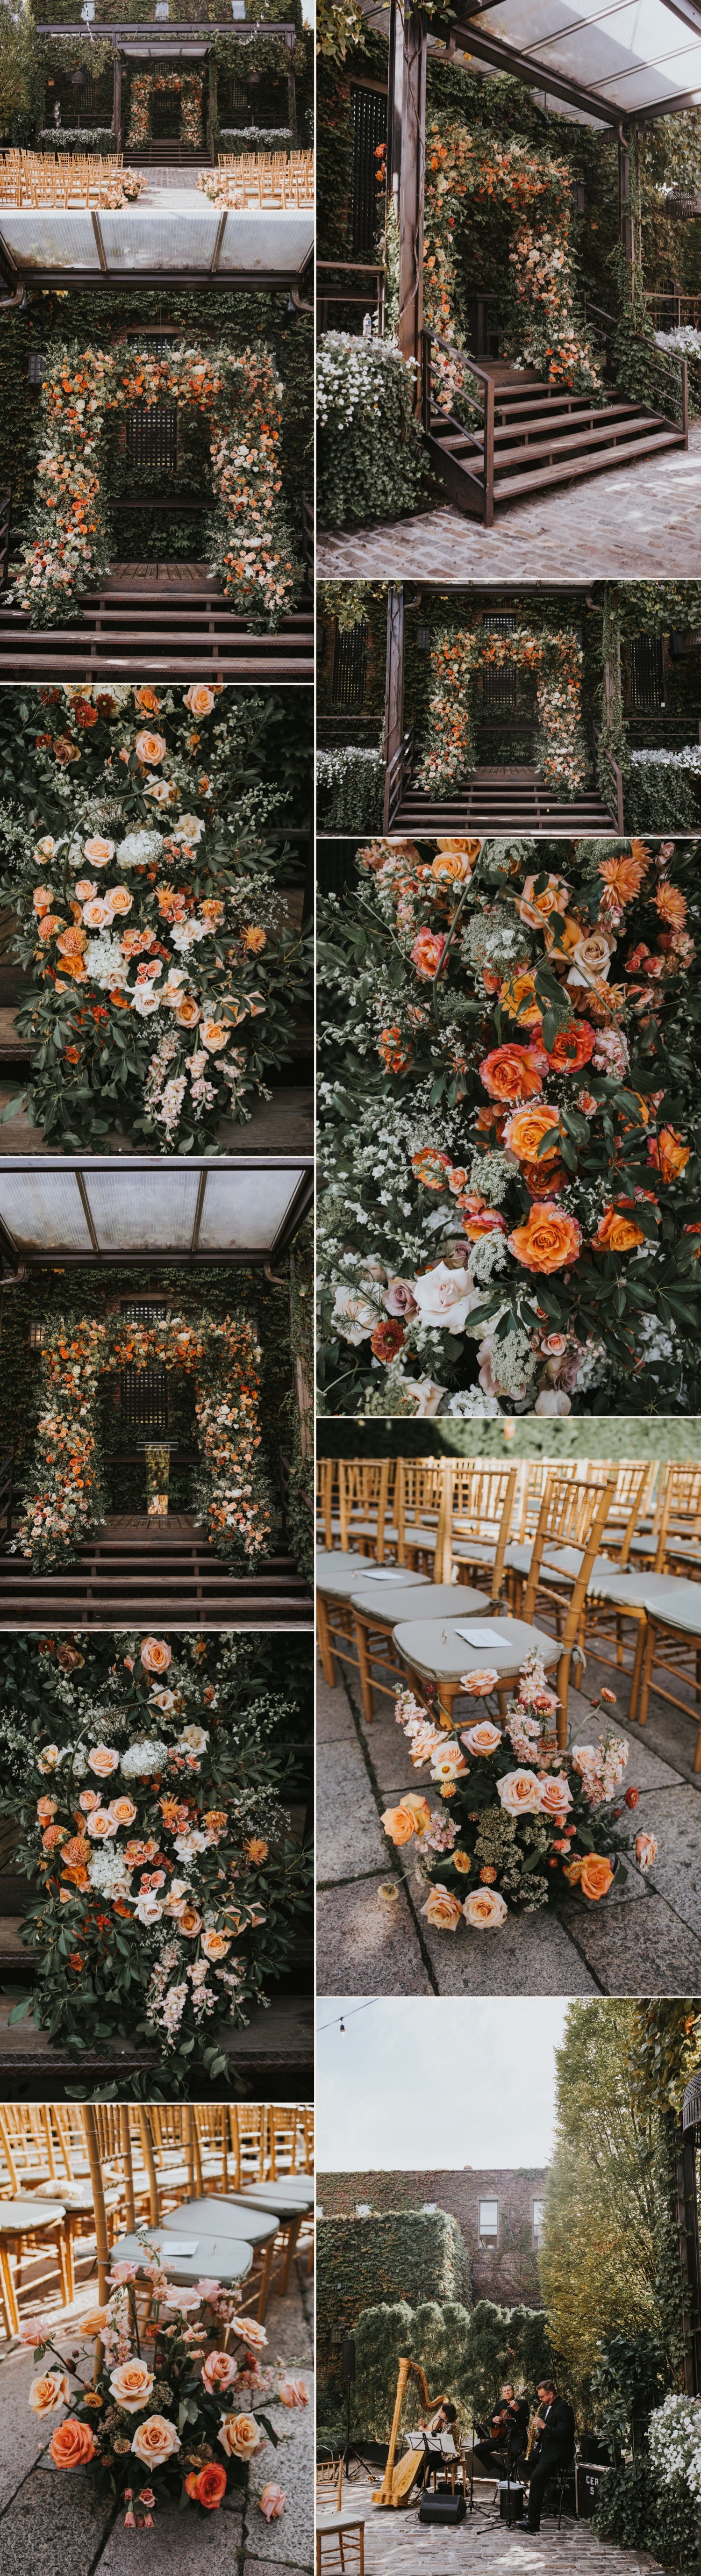 Hudson Valley Wedding Photographer, The Foundry LIC Wedding, The Foundry Wedding, Wedding Ceremony Florals, Wedding Arch Florals